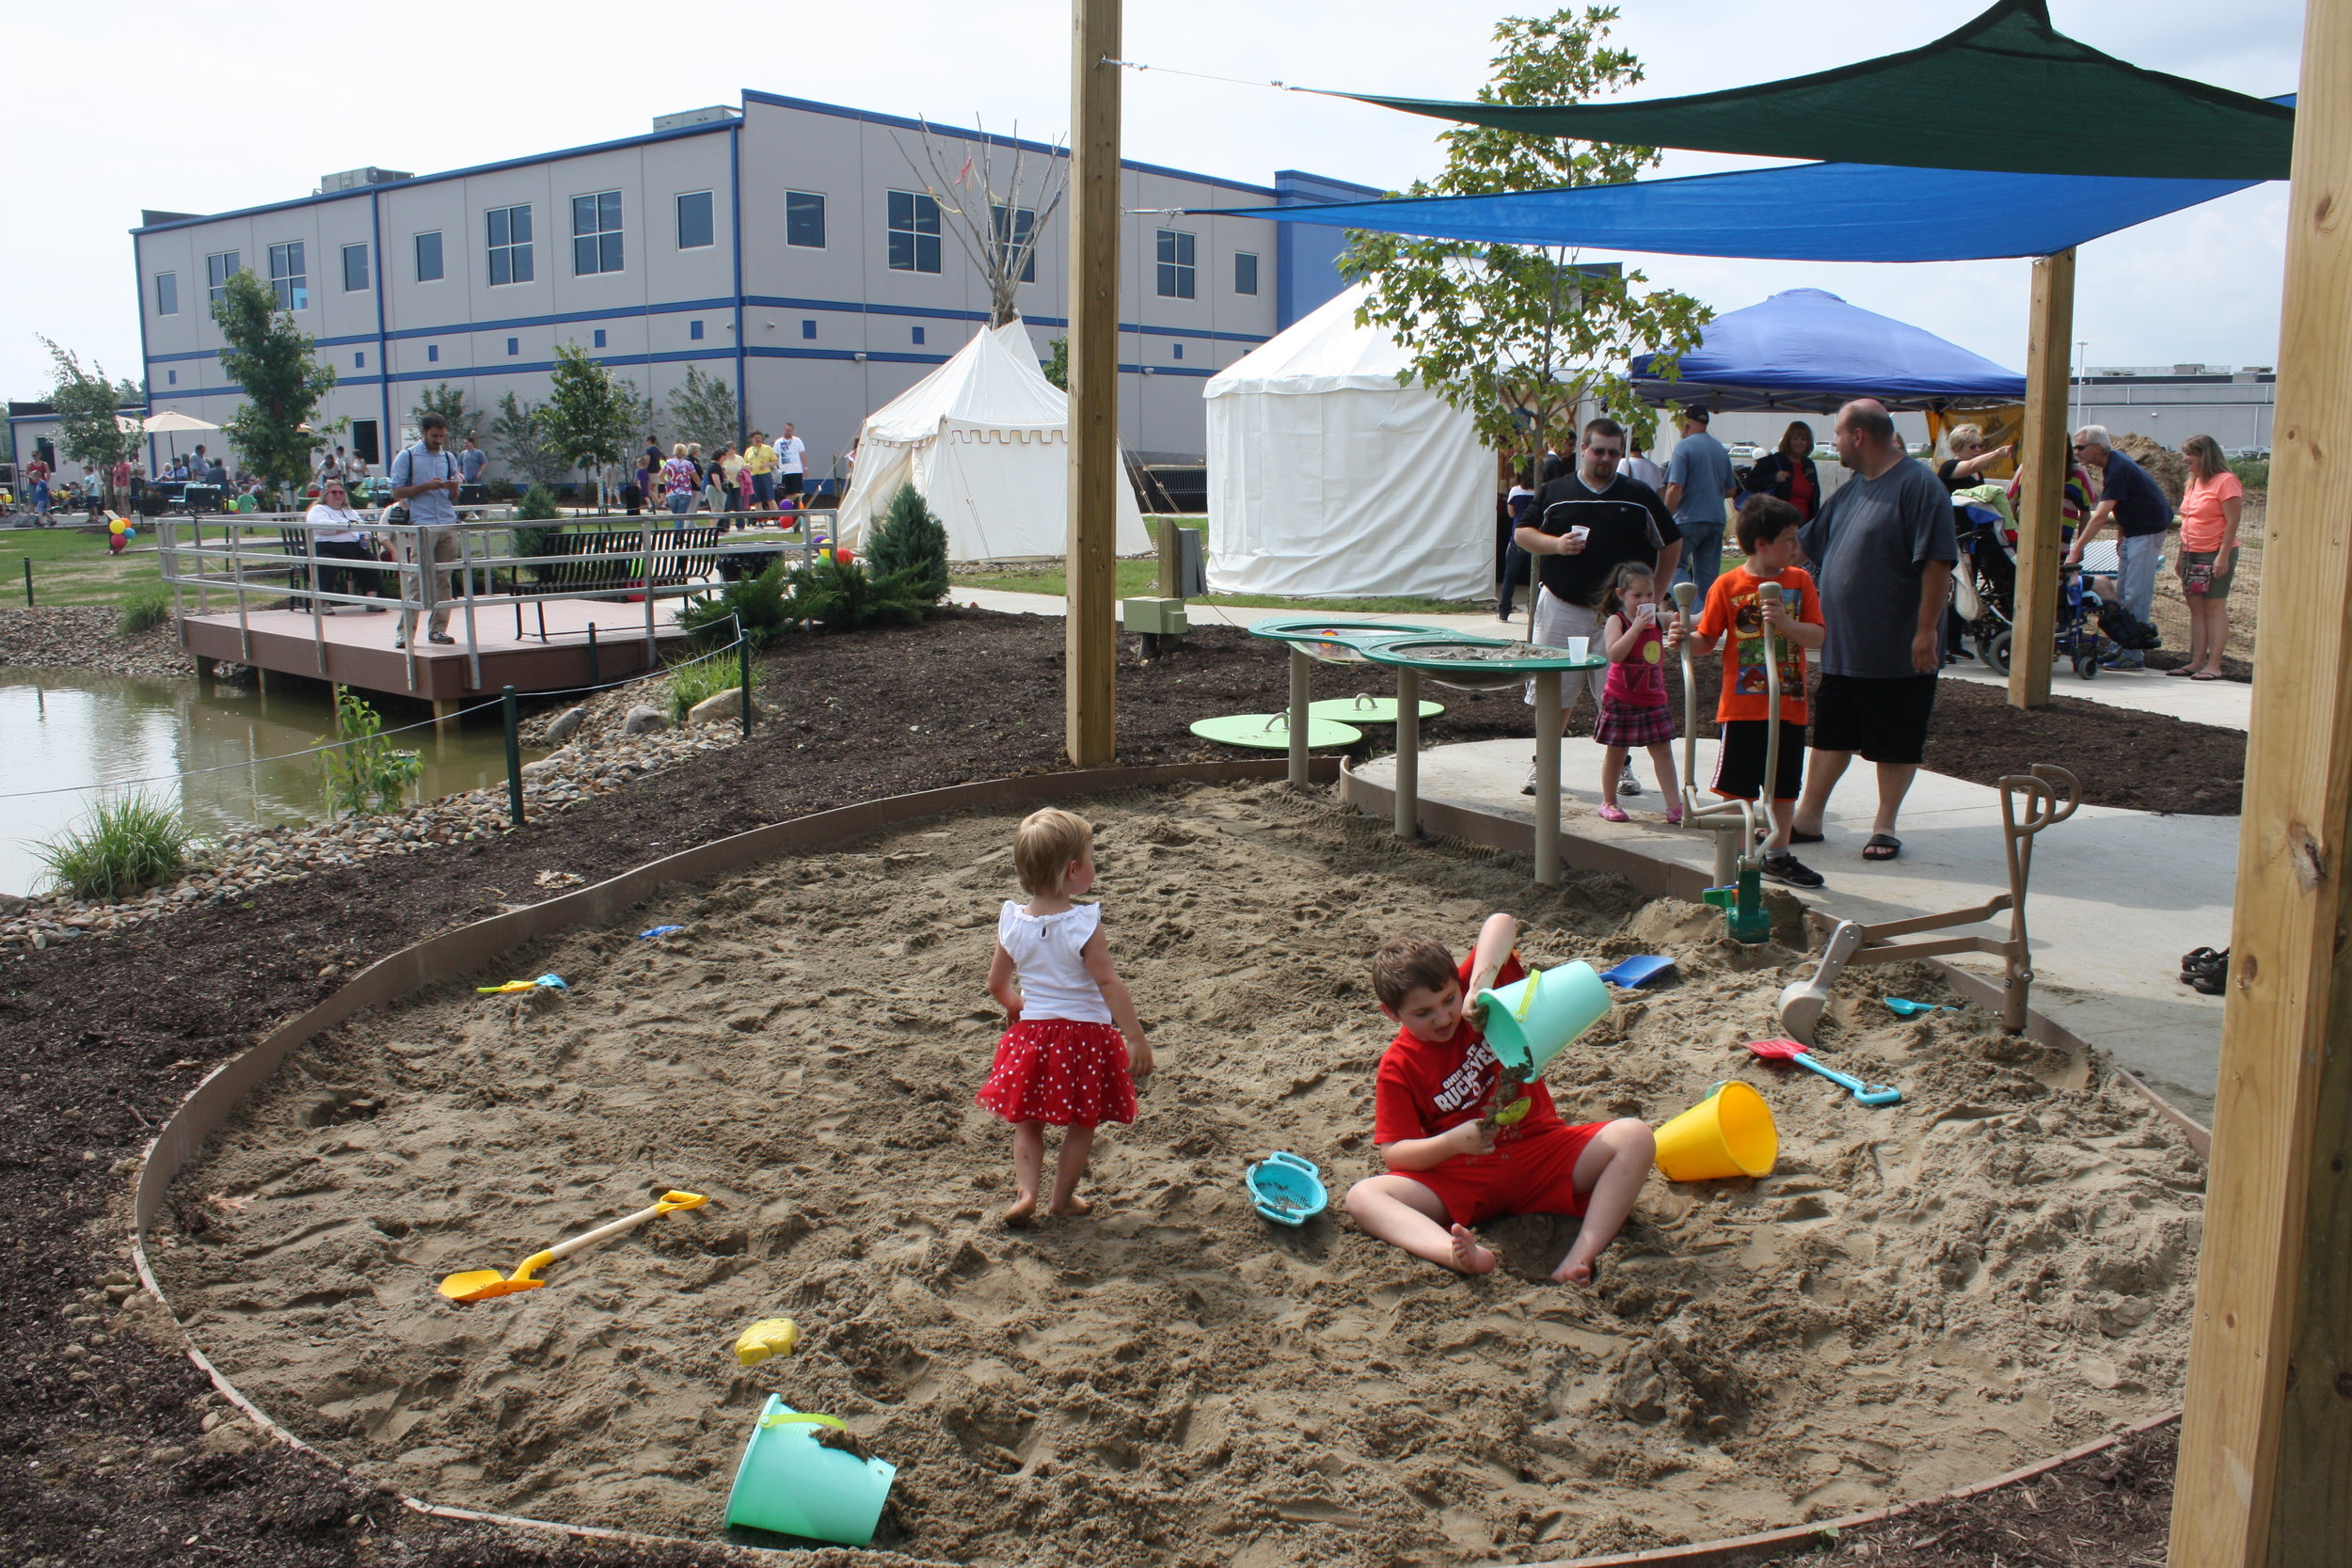 Sandpit with tent village and fishing dock in background